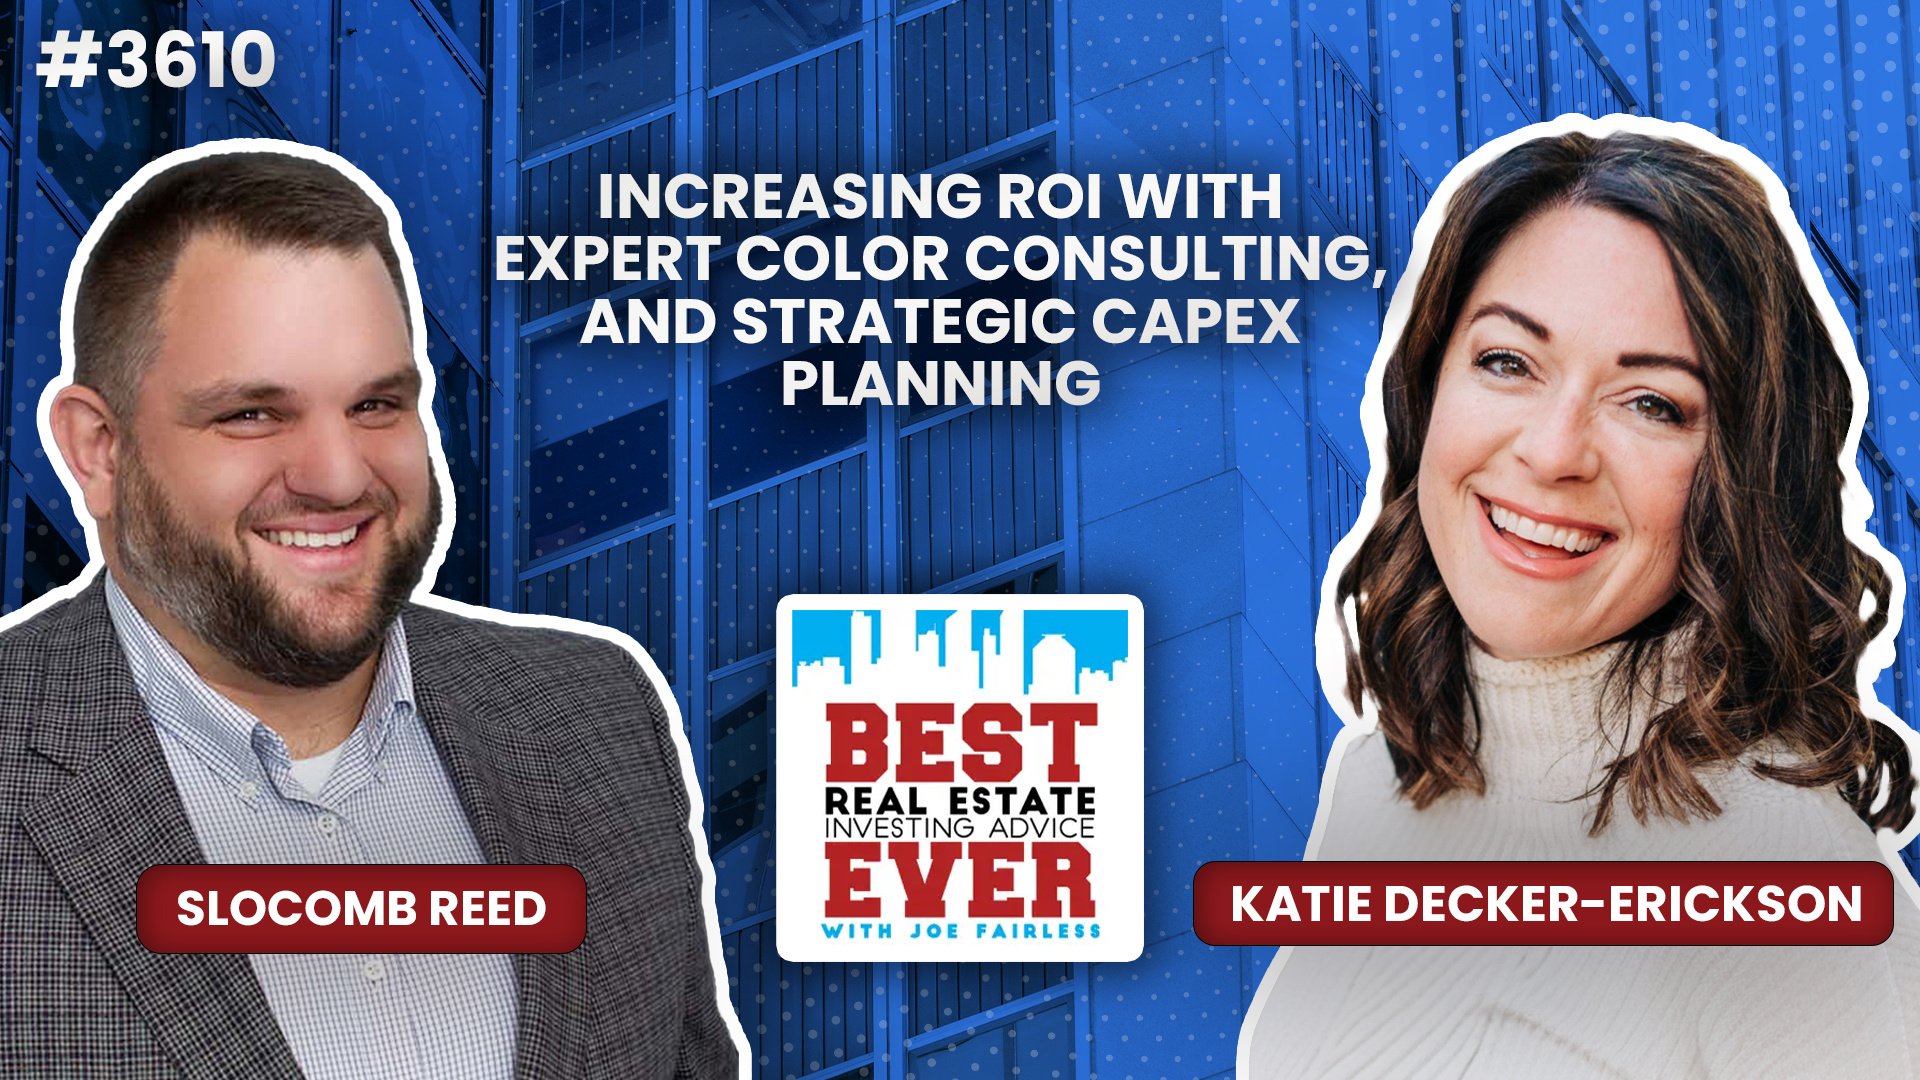 JF3610: Increasing ROI with Expert Color Consulting, and Strategic CapEx Planning ft. Katie Decker-Erickson